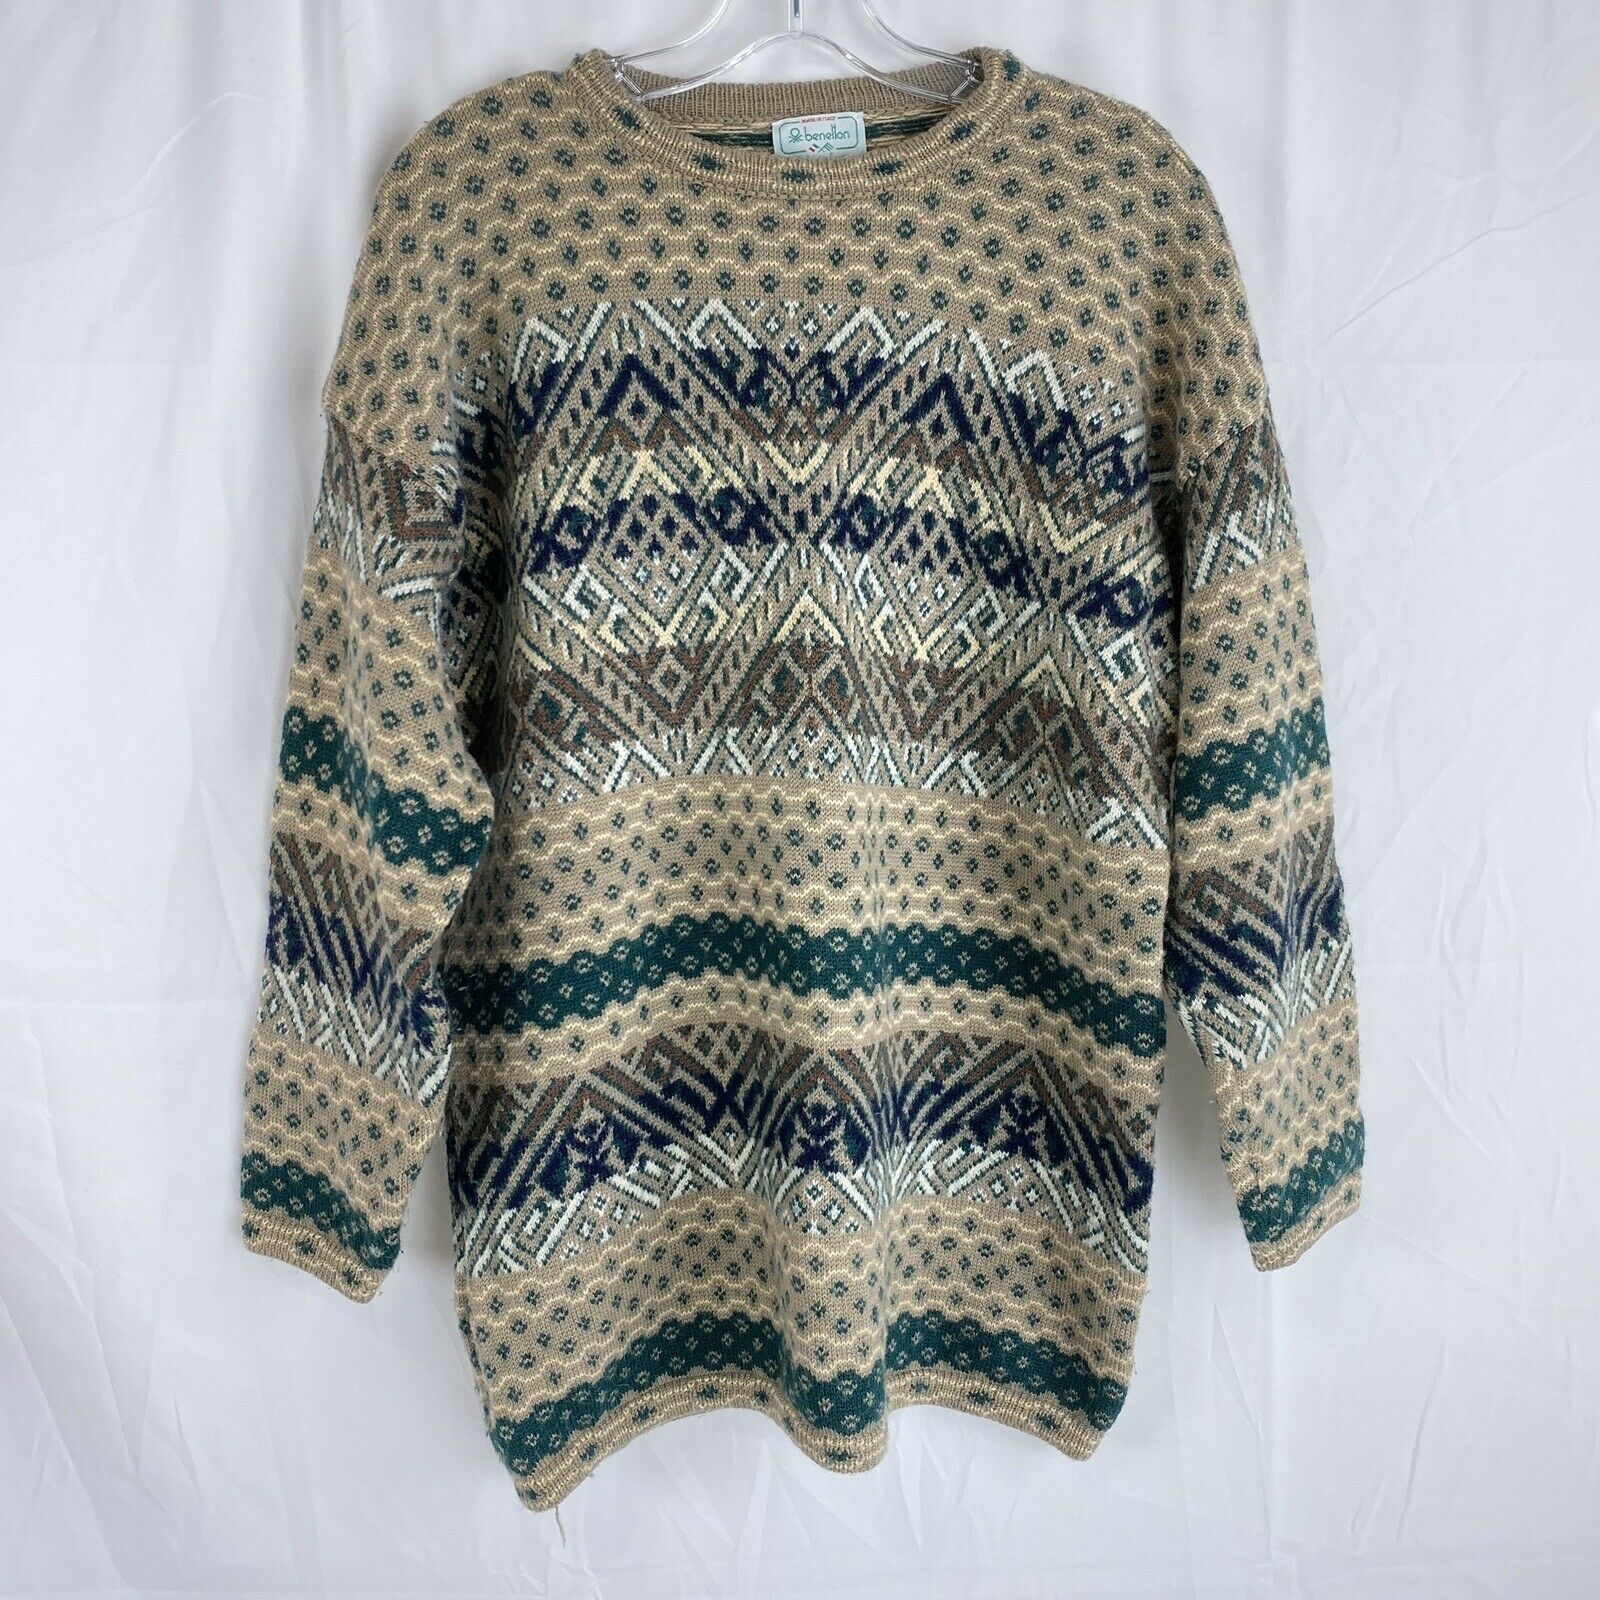 Vintage 80s Benetton Sweater Unisex Size M Or L Made In Italy